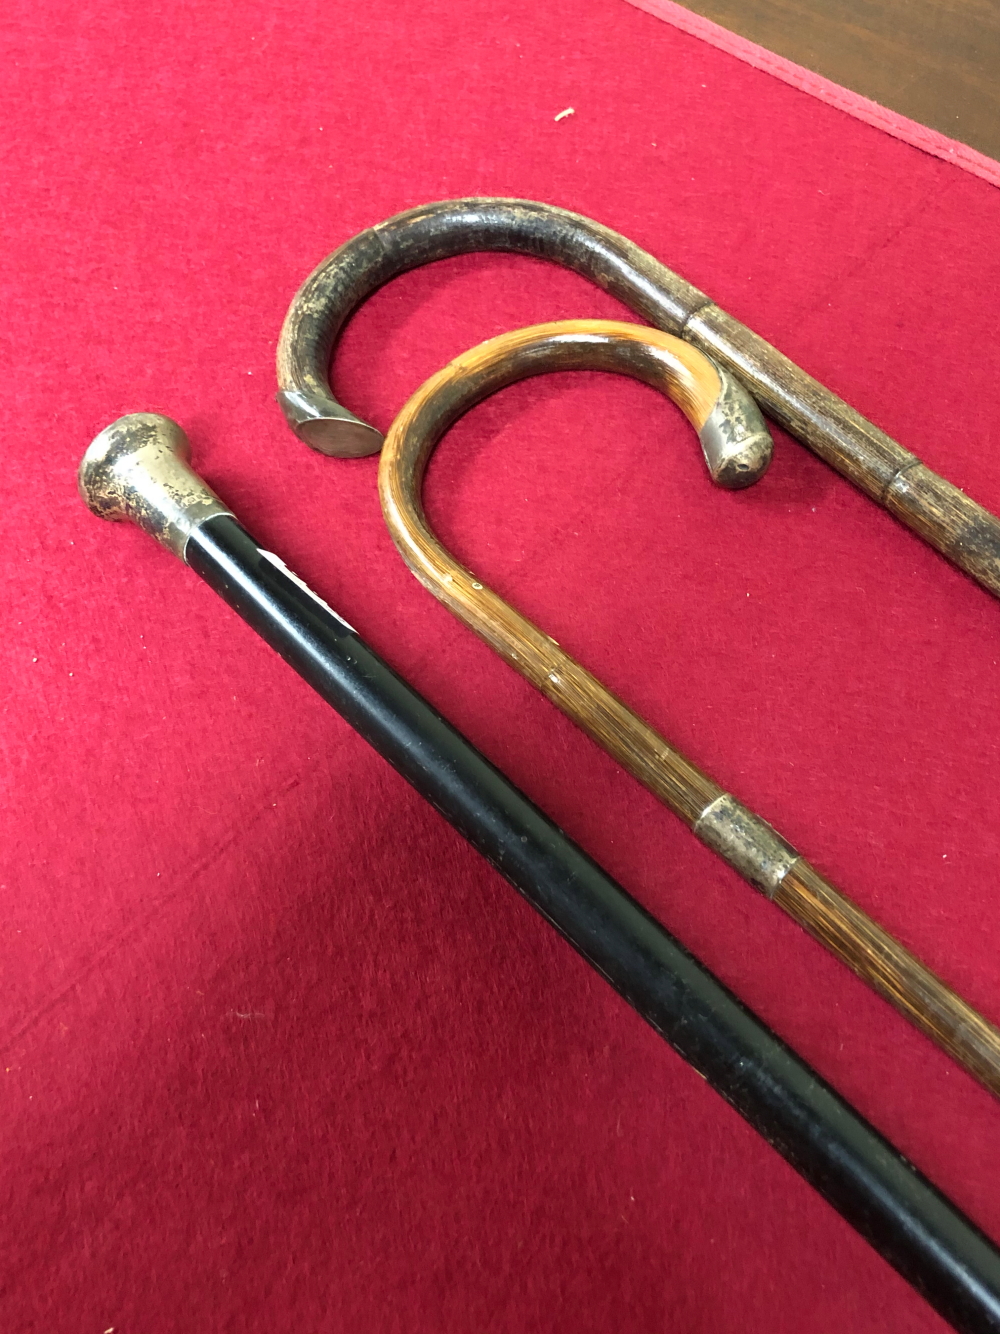 A SILVER TOPPED BLACK MALACCA WALKING CANE AND TWO BAMBOO WALKING STICKS WITH WHITE METAL MOUNTS - Image 20 of 20